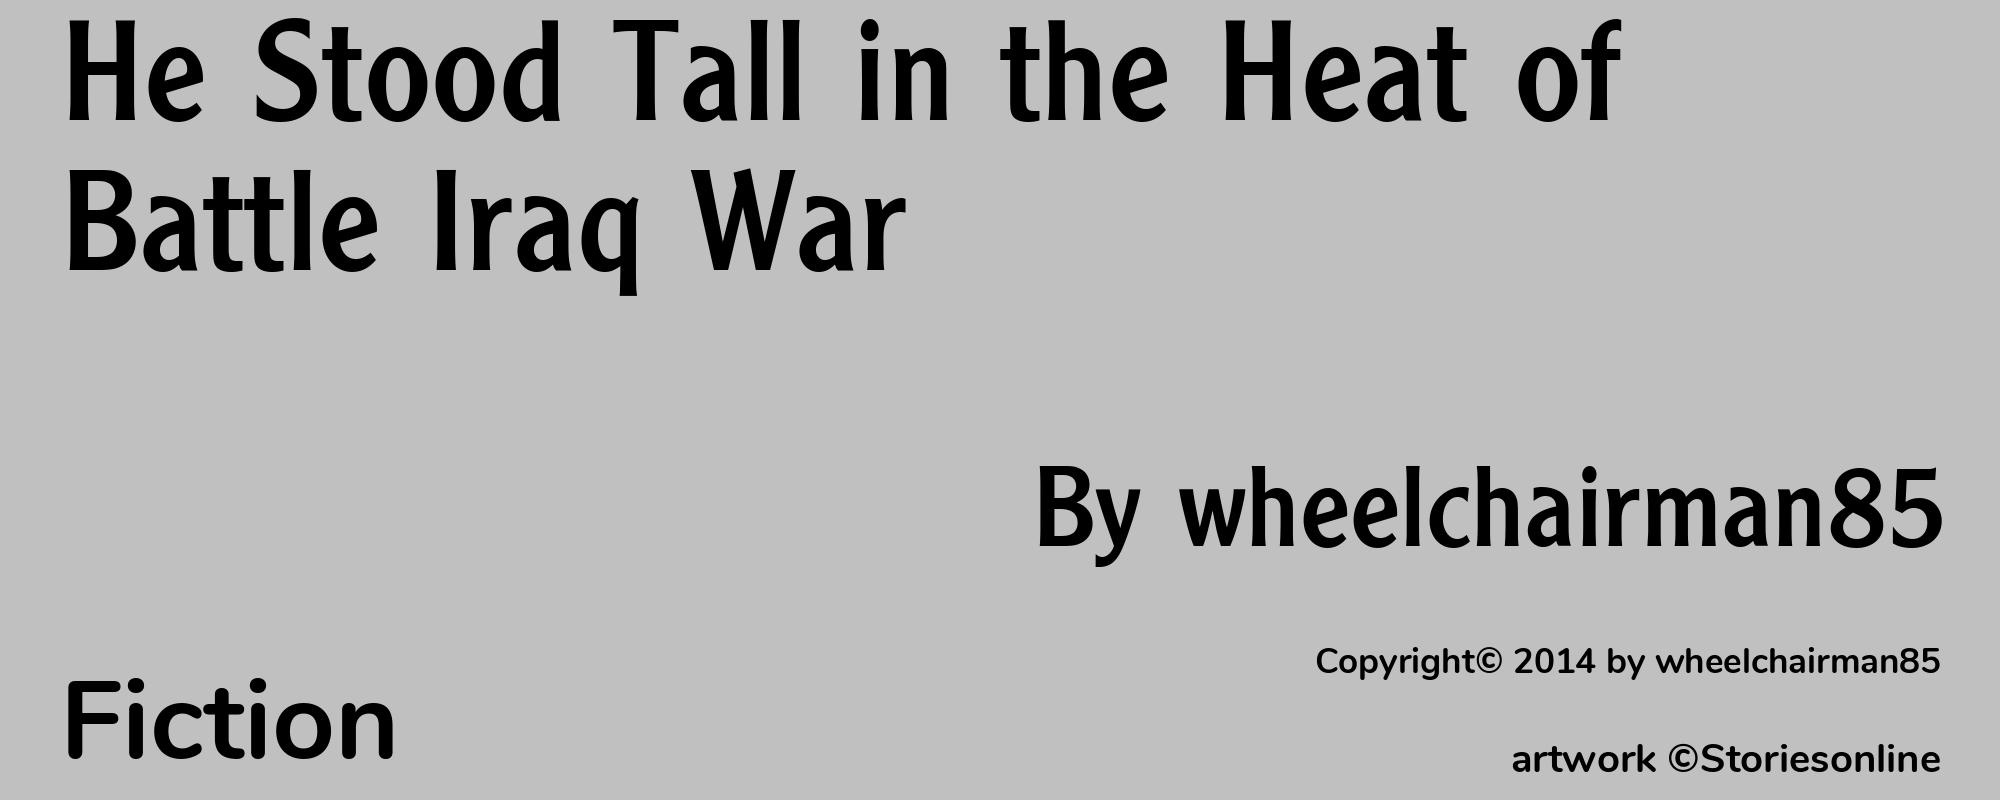 He Stood Tall in the Heat of Battle Iraq War - Cover